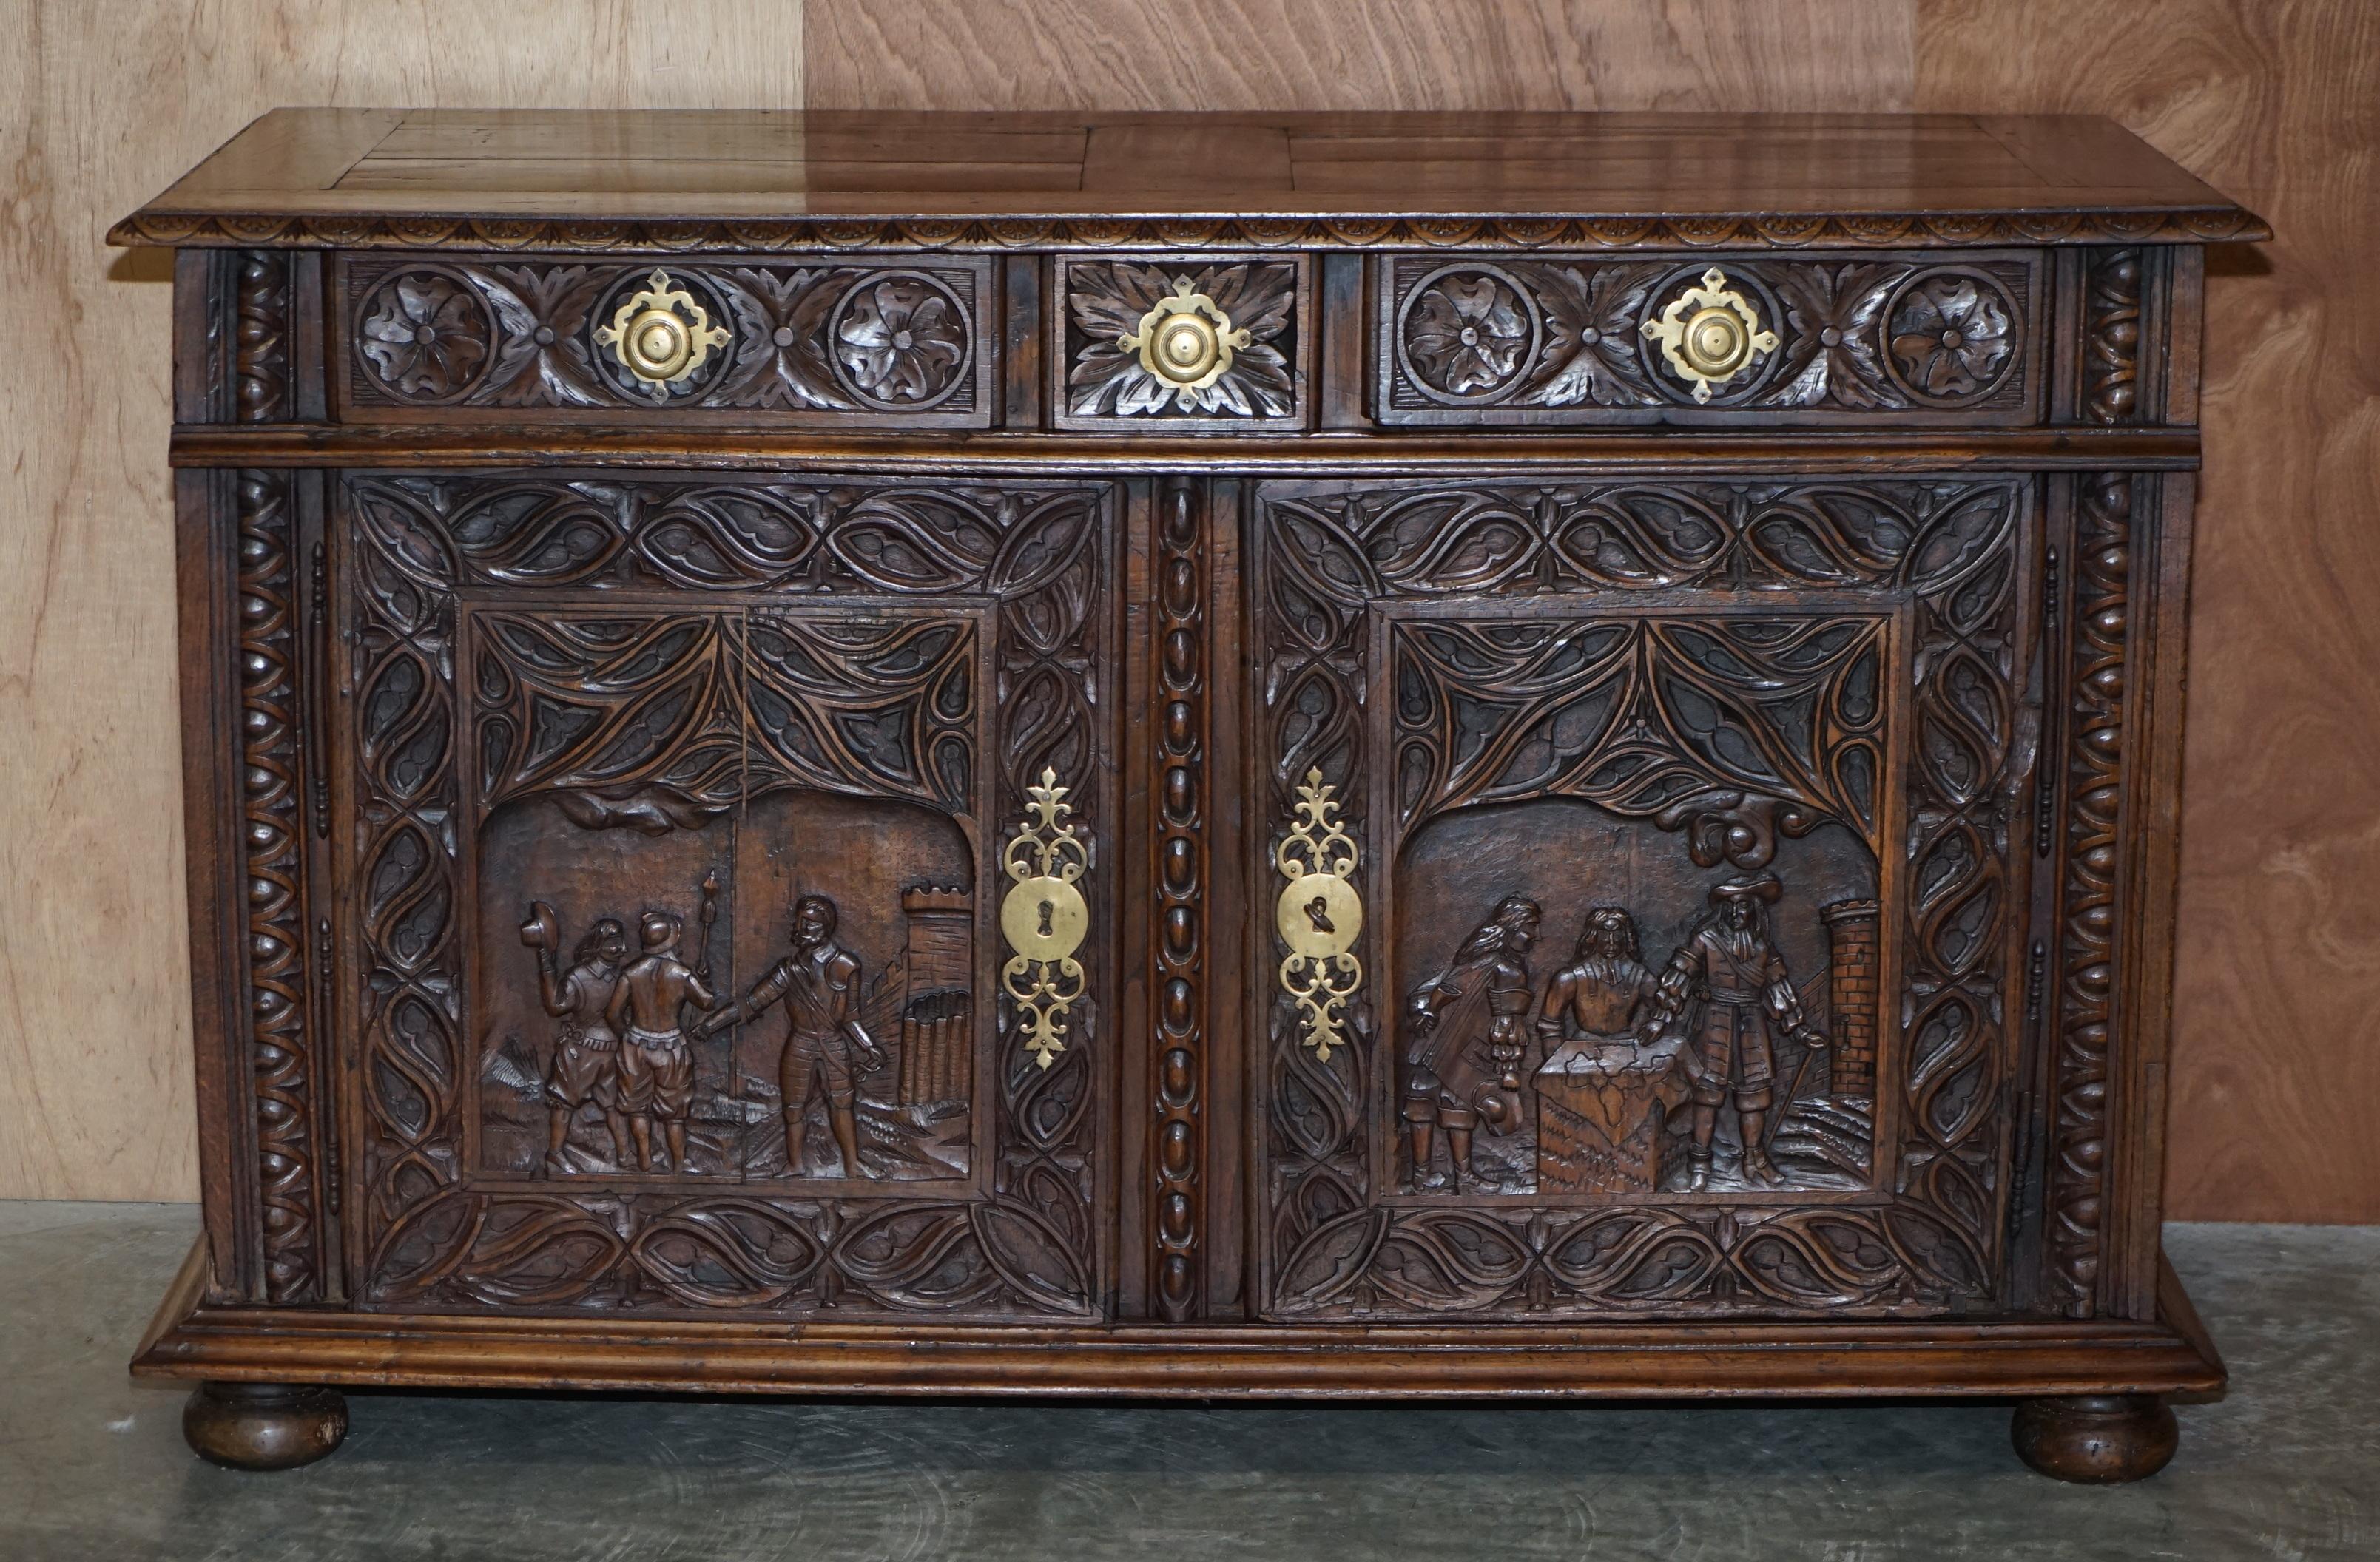 We are delighted to offer for sale this stunning 18th century circa 1740 hand carved continental European sideboard with military carved panels

A good looking well made and decorative piece. This is a rare survivor and looks absolutely stunning